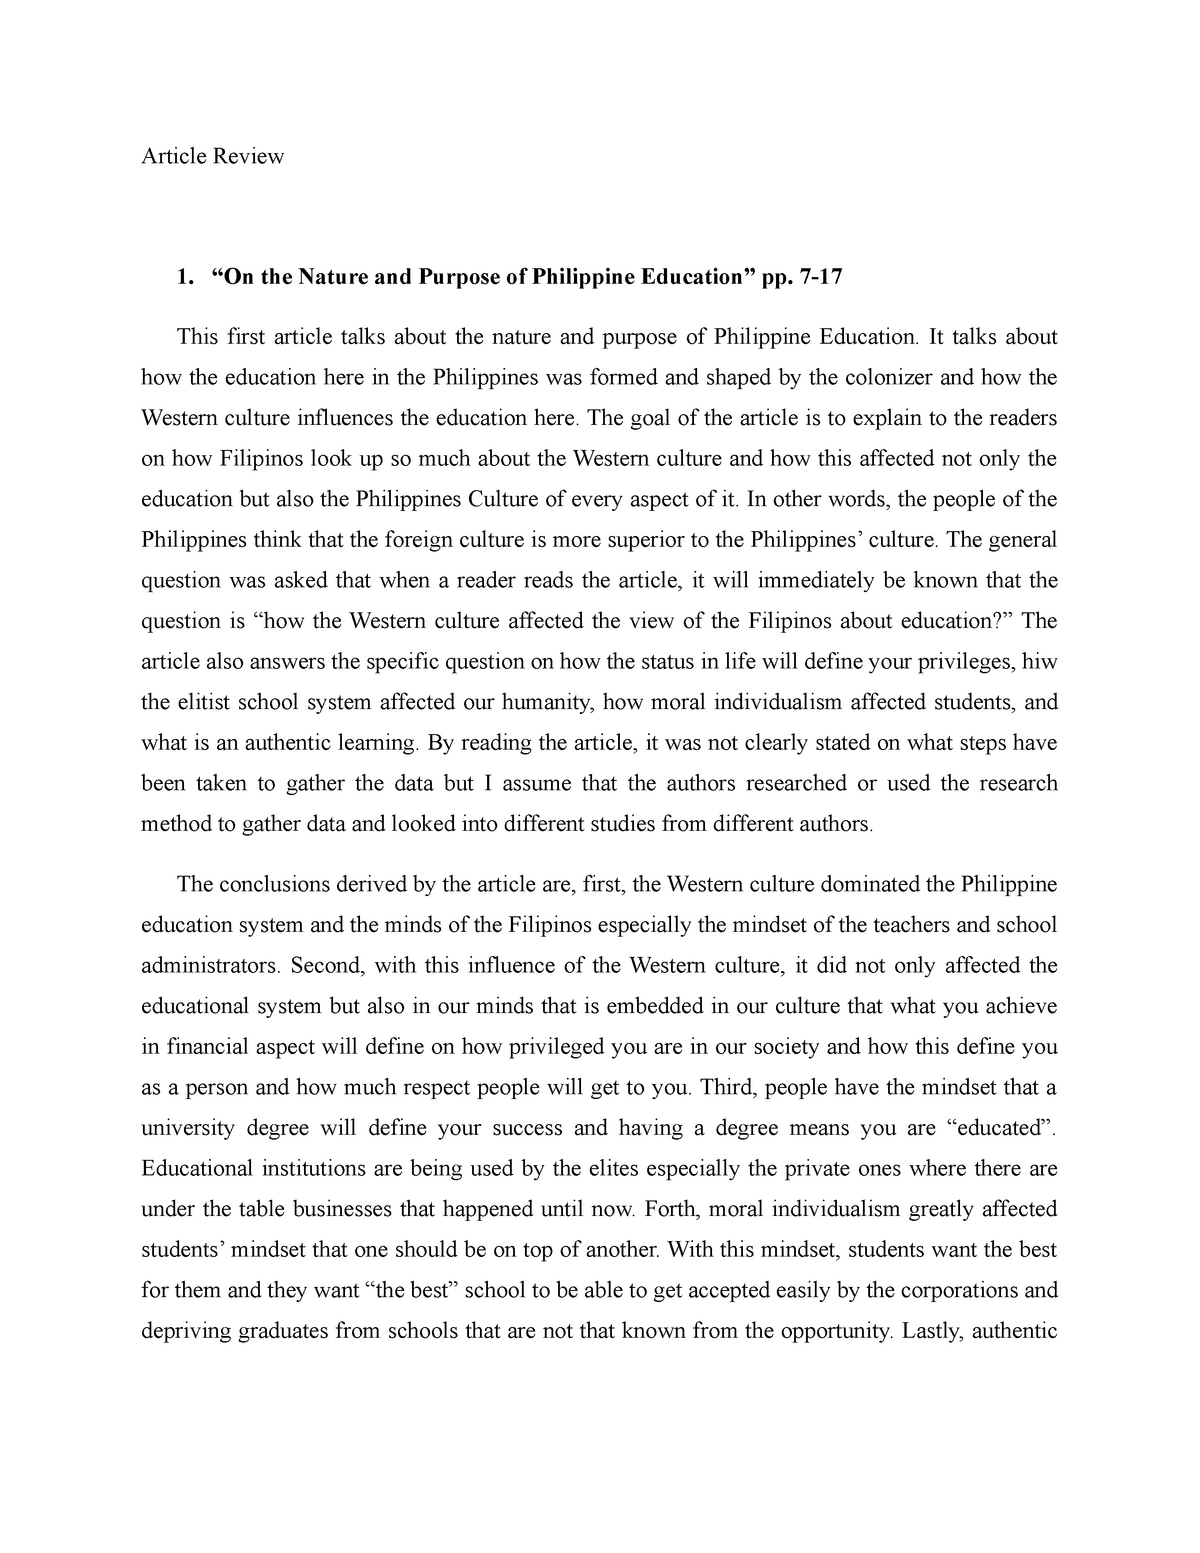 article review on the nature and purpose of philippine education